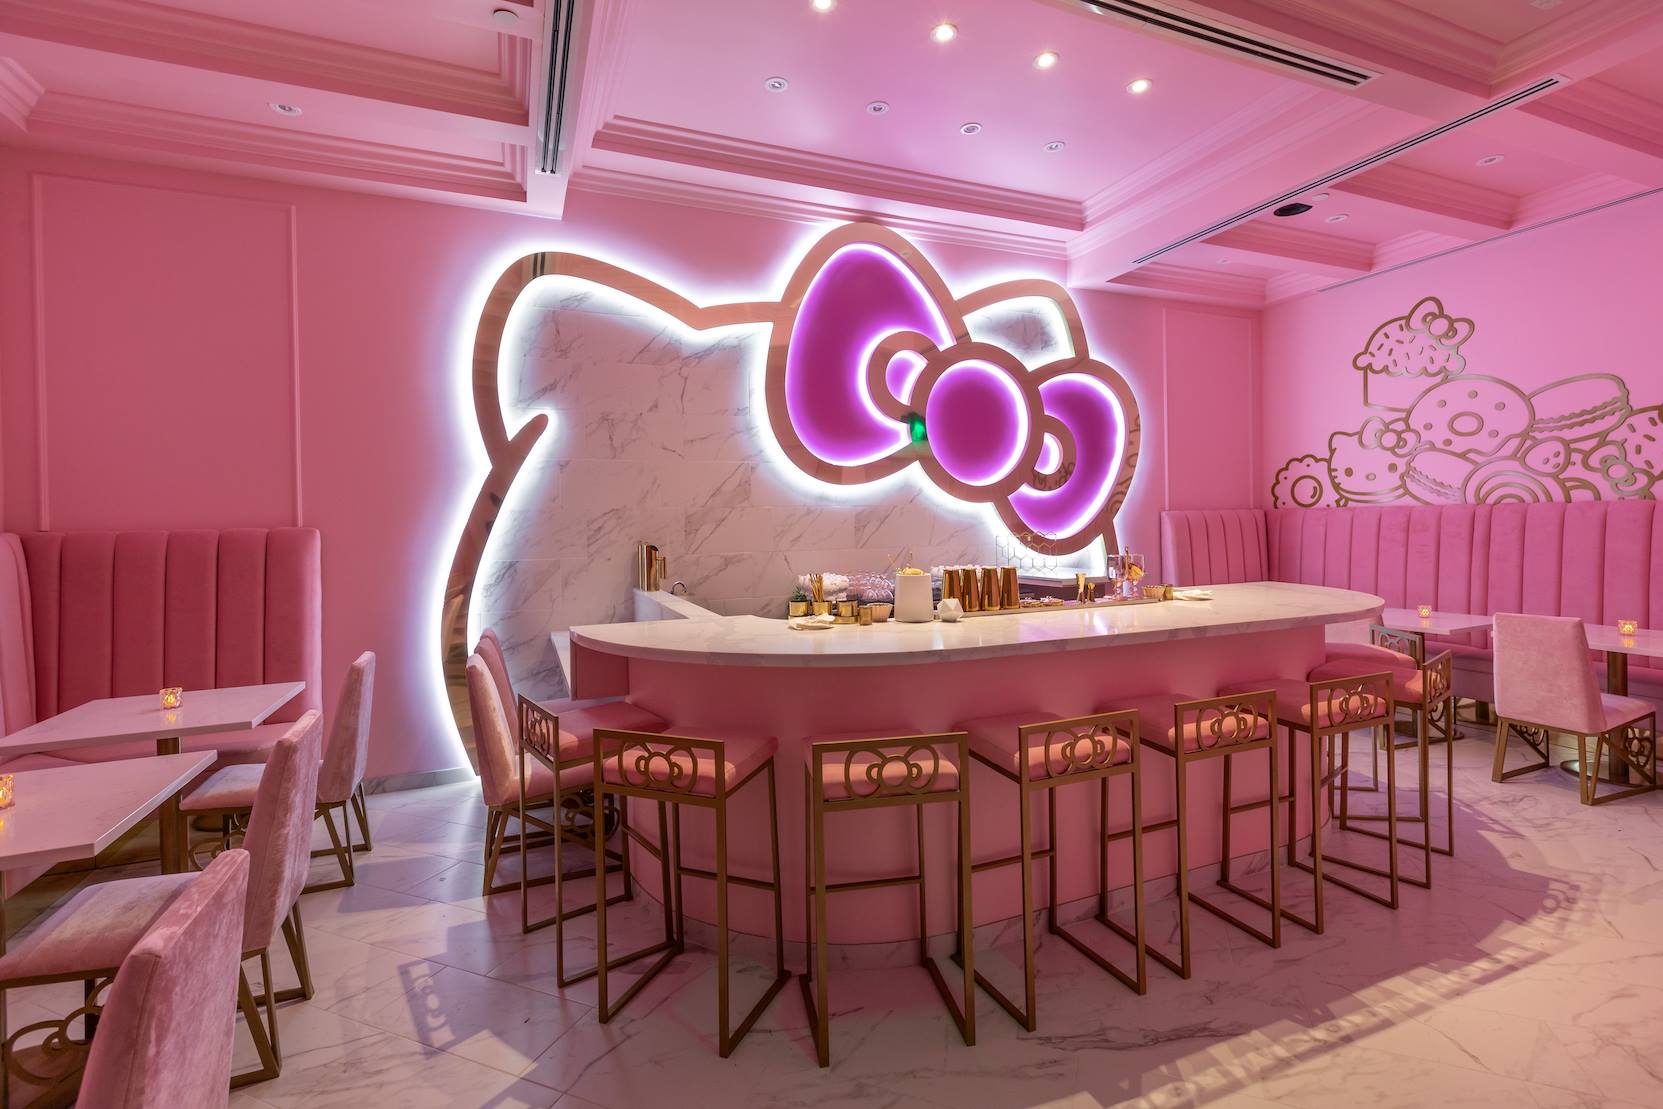 Hello Kitty Cafe truck returns to Baltimore area